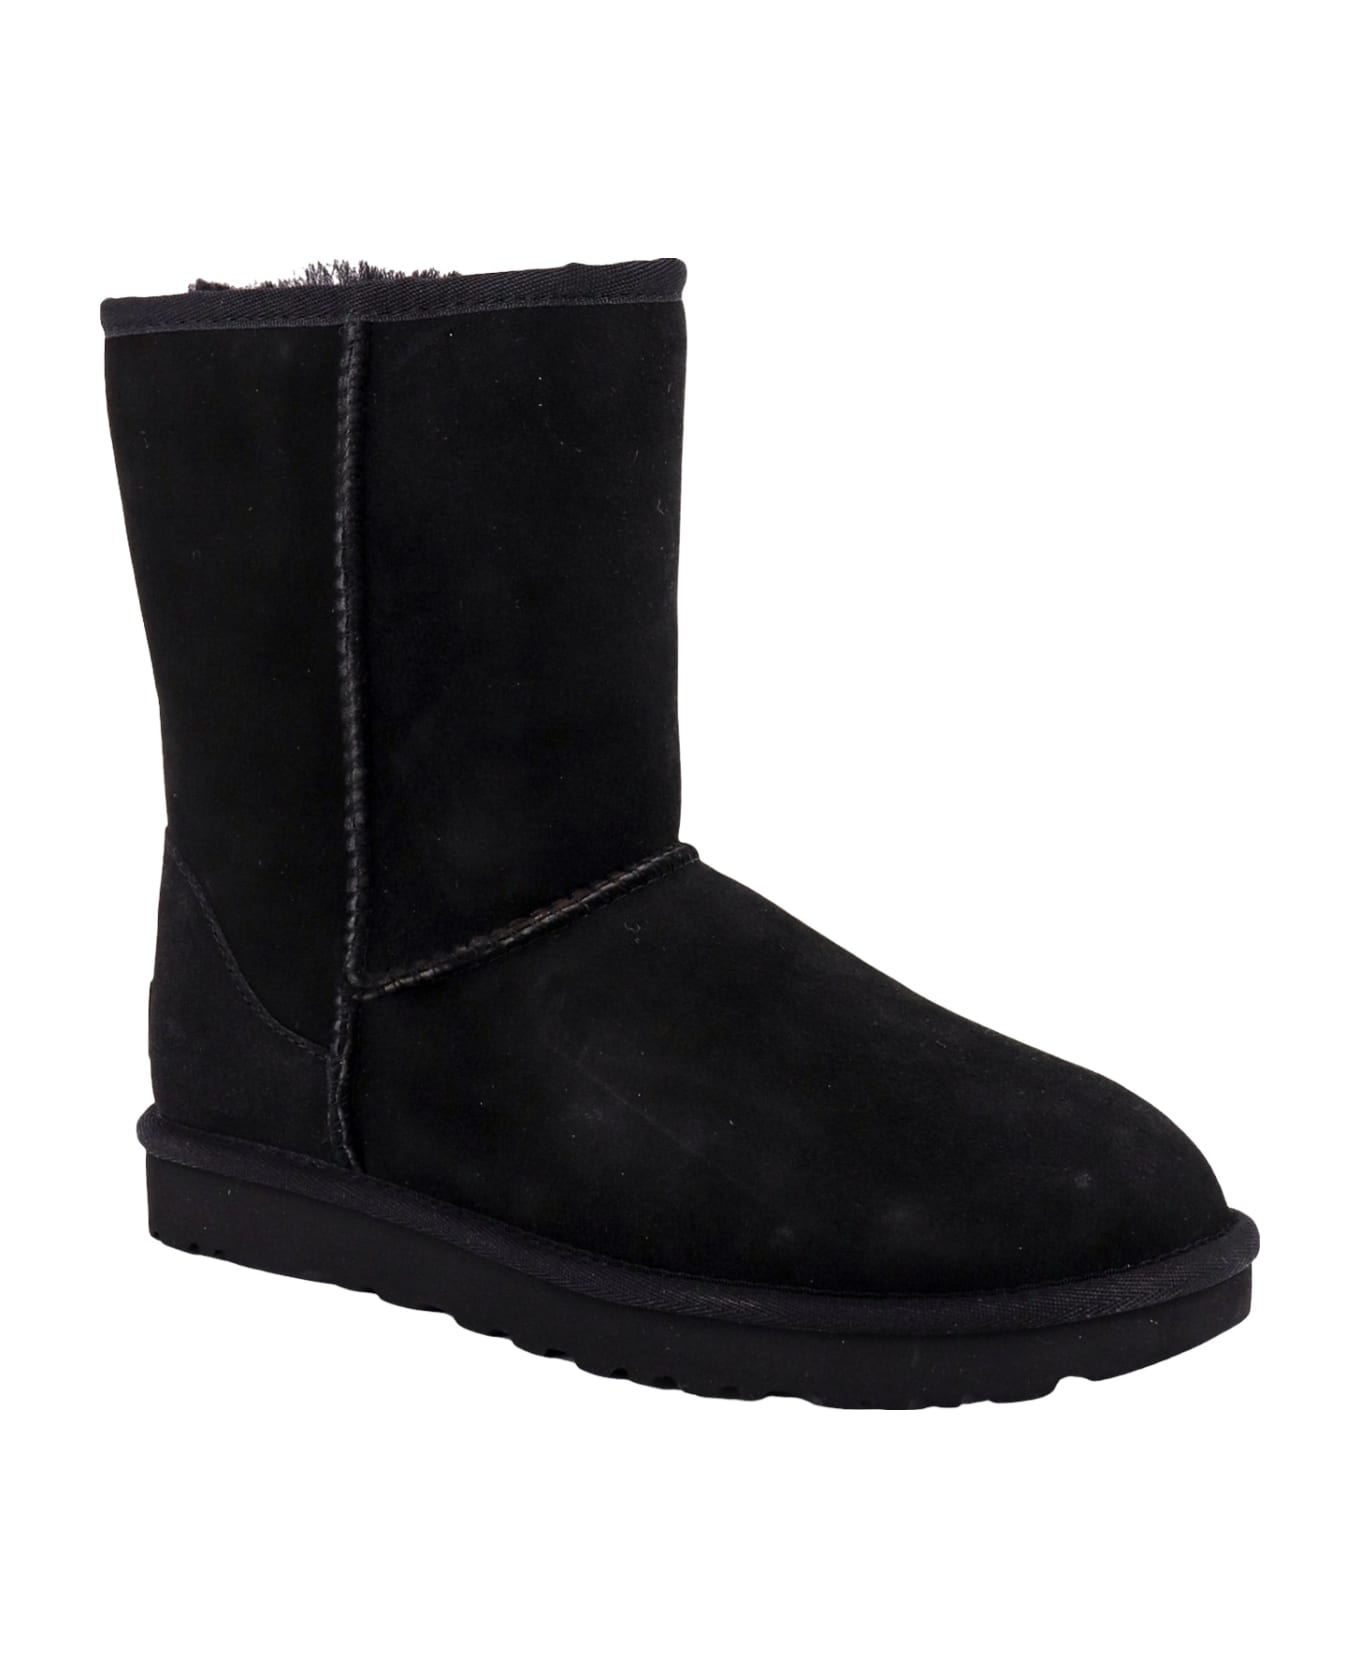 UGG Classic Short Ankle Boots - Black